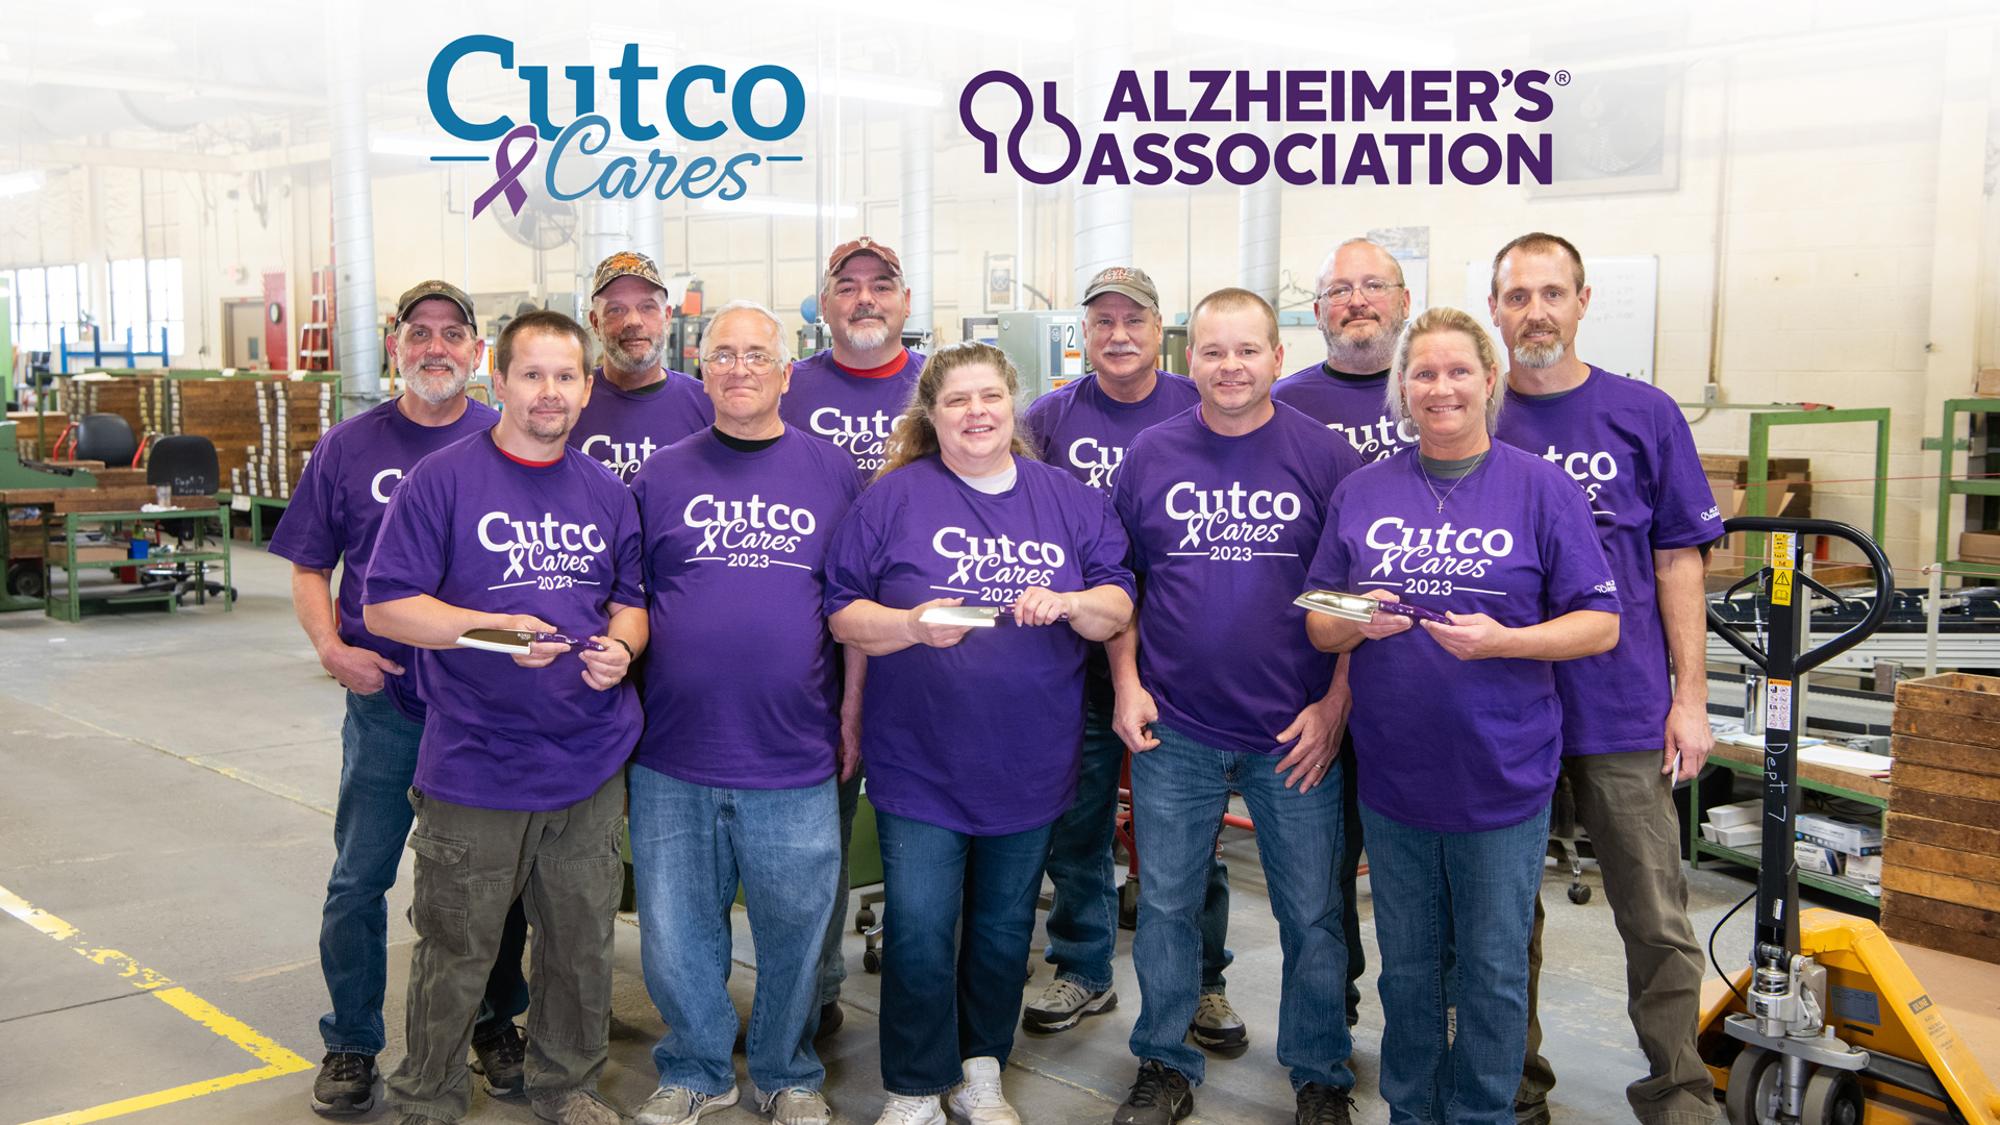 Purple Cutco Product Supports the Alzheimer's Association